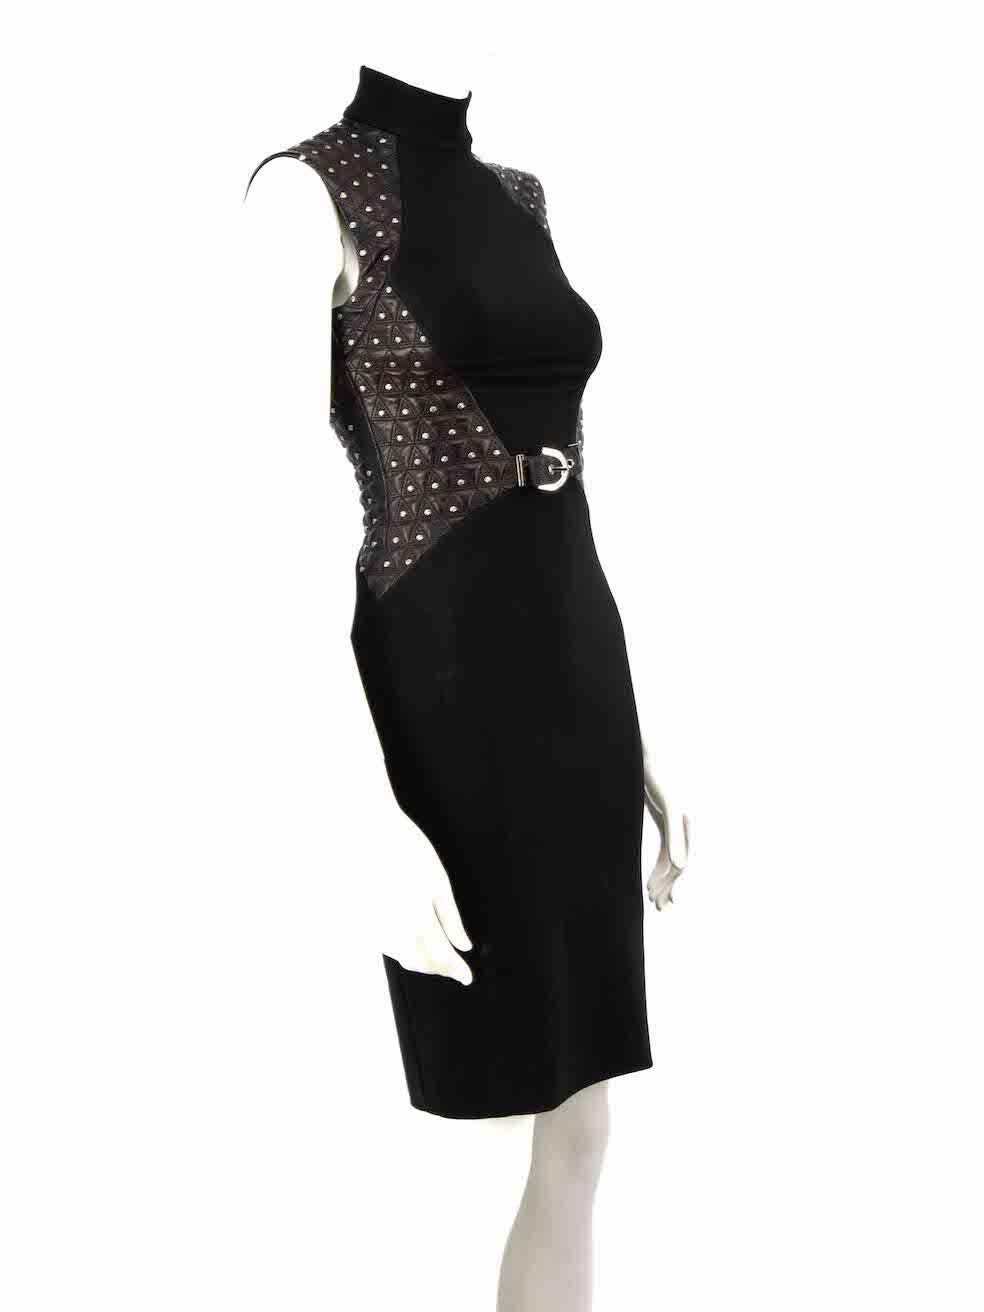 CONDITION is Very good. Hardly any visible wear to dress is evident on this used Versace designer resale item.
 
 
 
 Details
 
 
 Black
 
 Viscose
 
 Dress
 
 Midi
 
 Sleeveless
 
 Leather studded panel
 
 Mock neck
 
 Back zip and hook fastening
